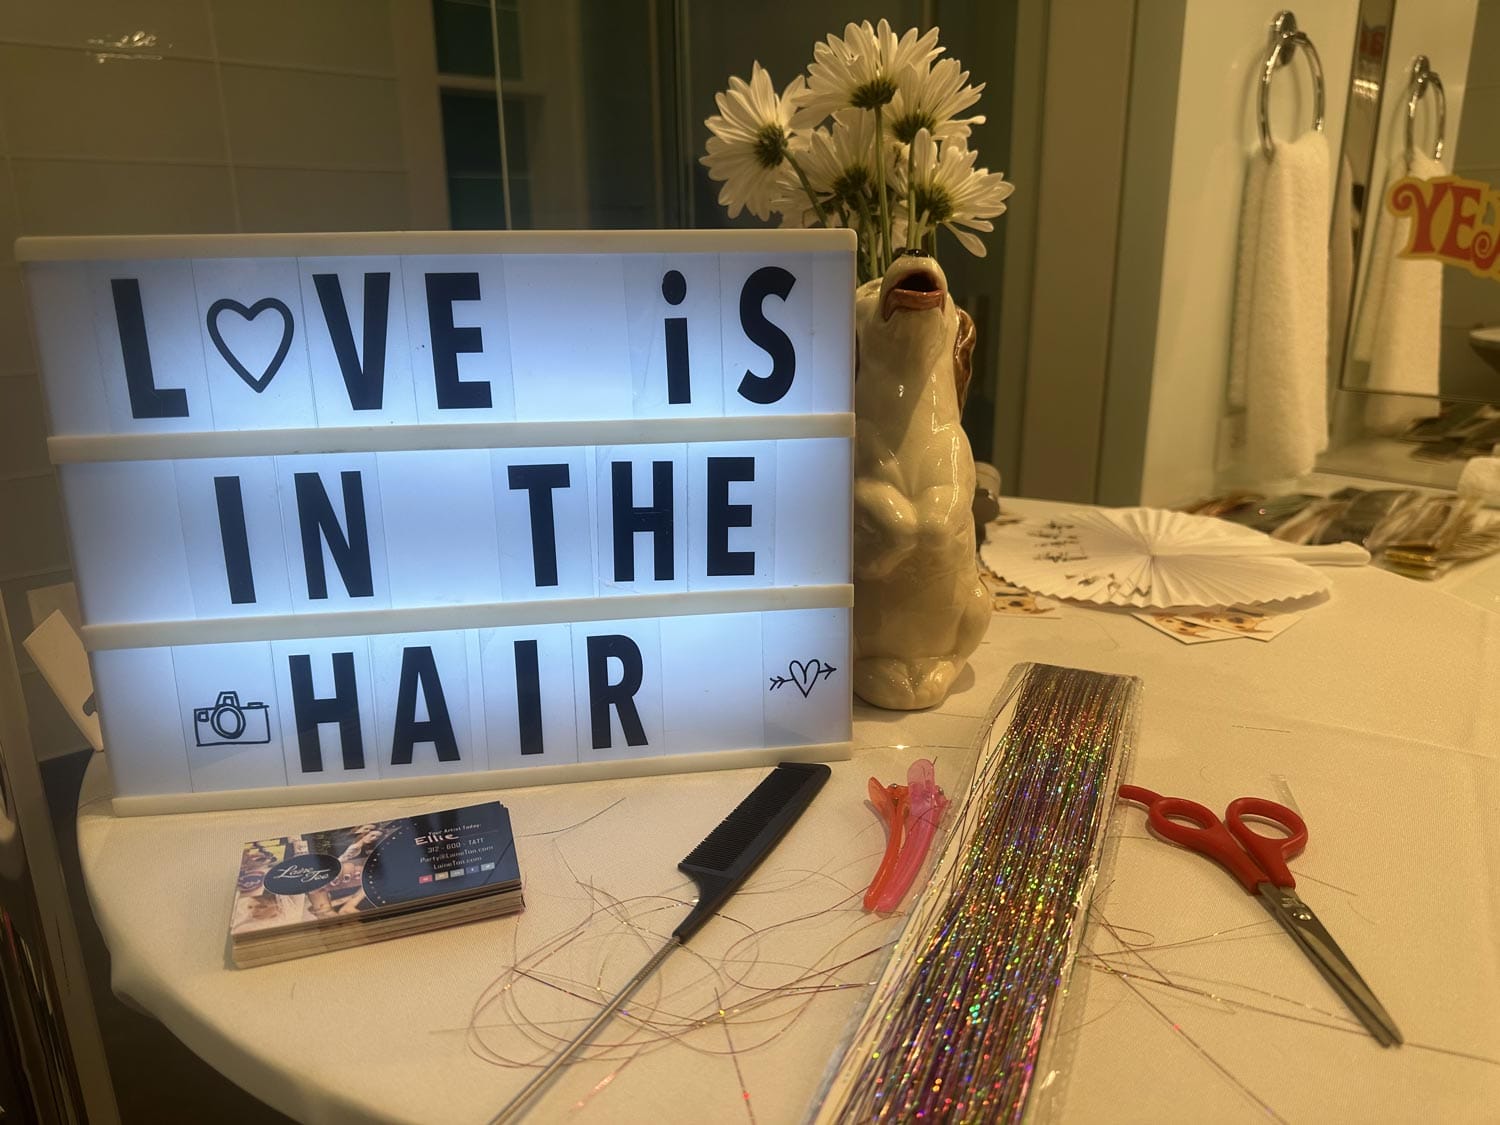 Lightbox with the phrase "love is in the hair" on a table with a vase of white flowers, hair accessories, and scissors.